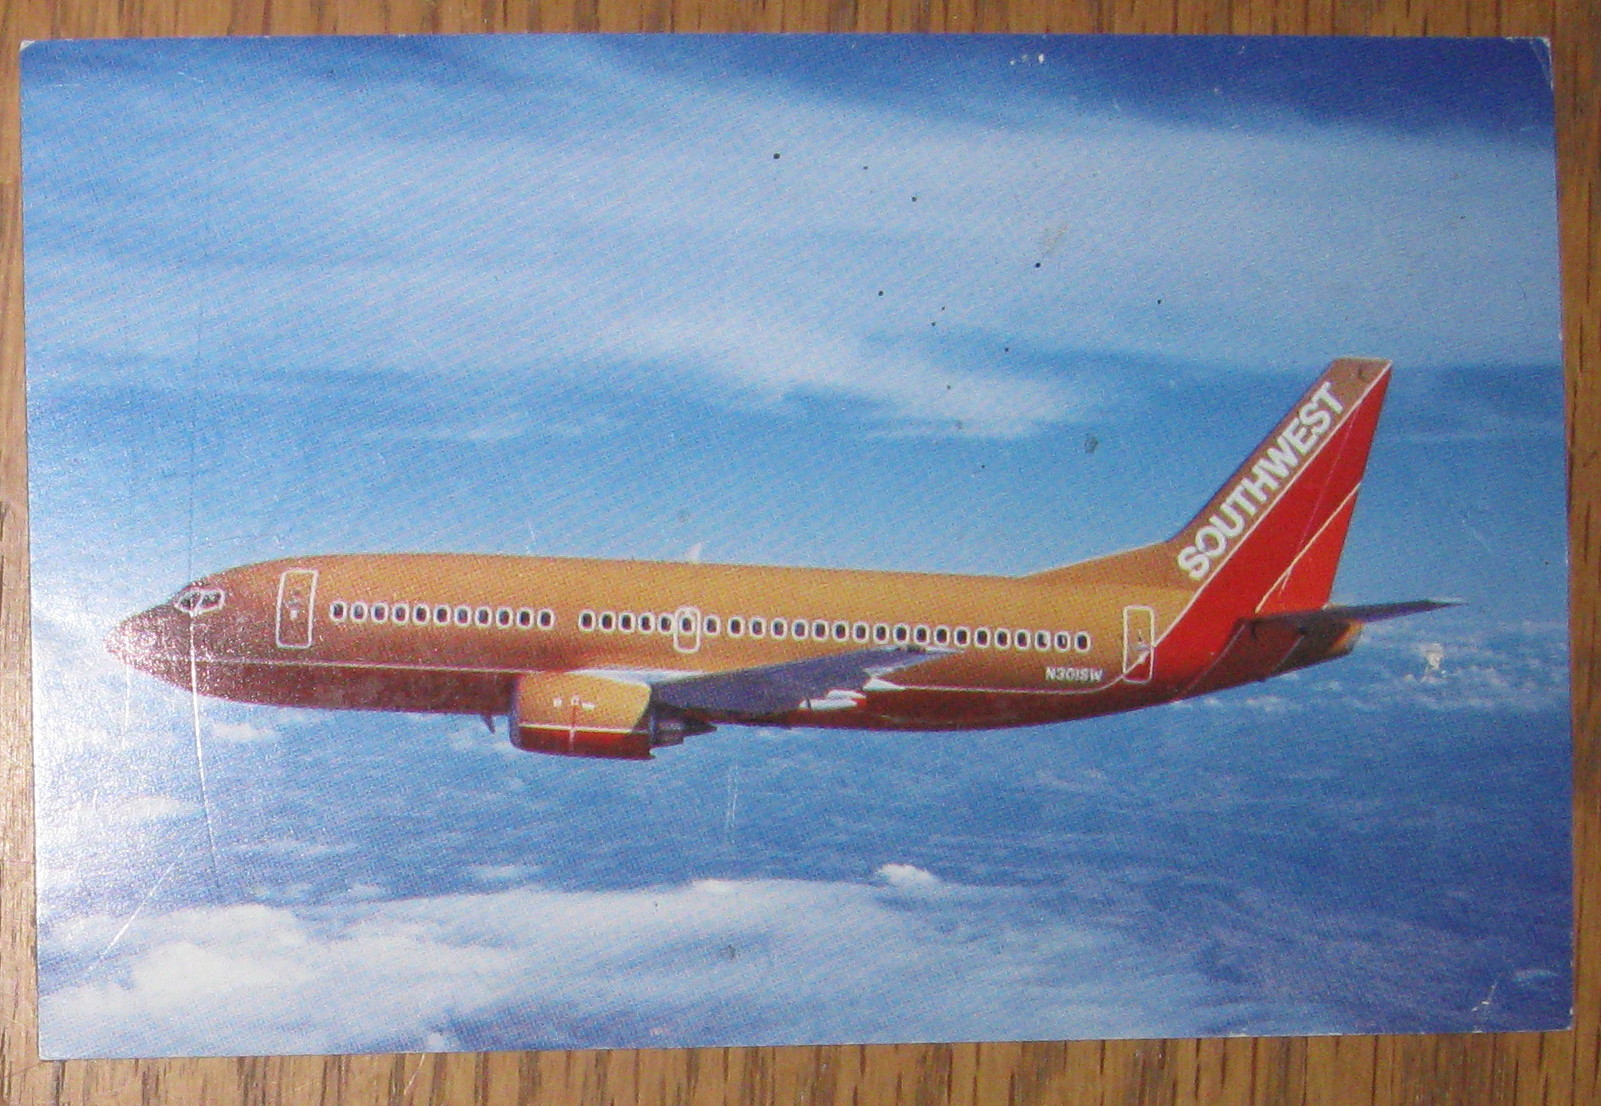 Southwest Airlines 737-300